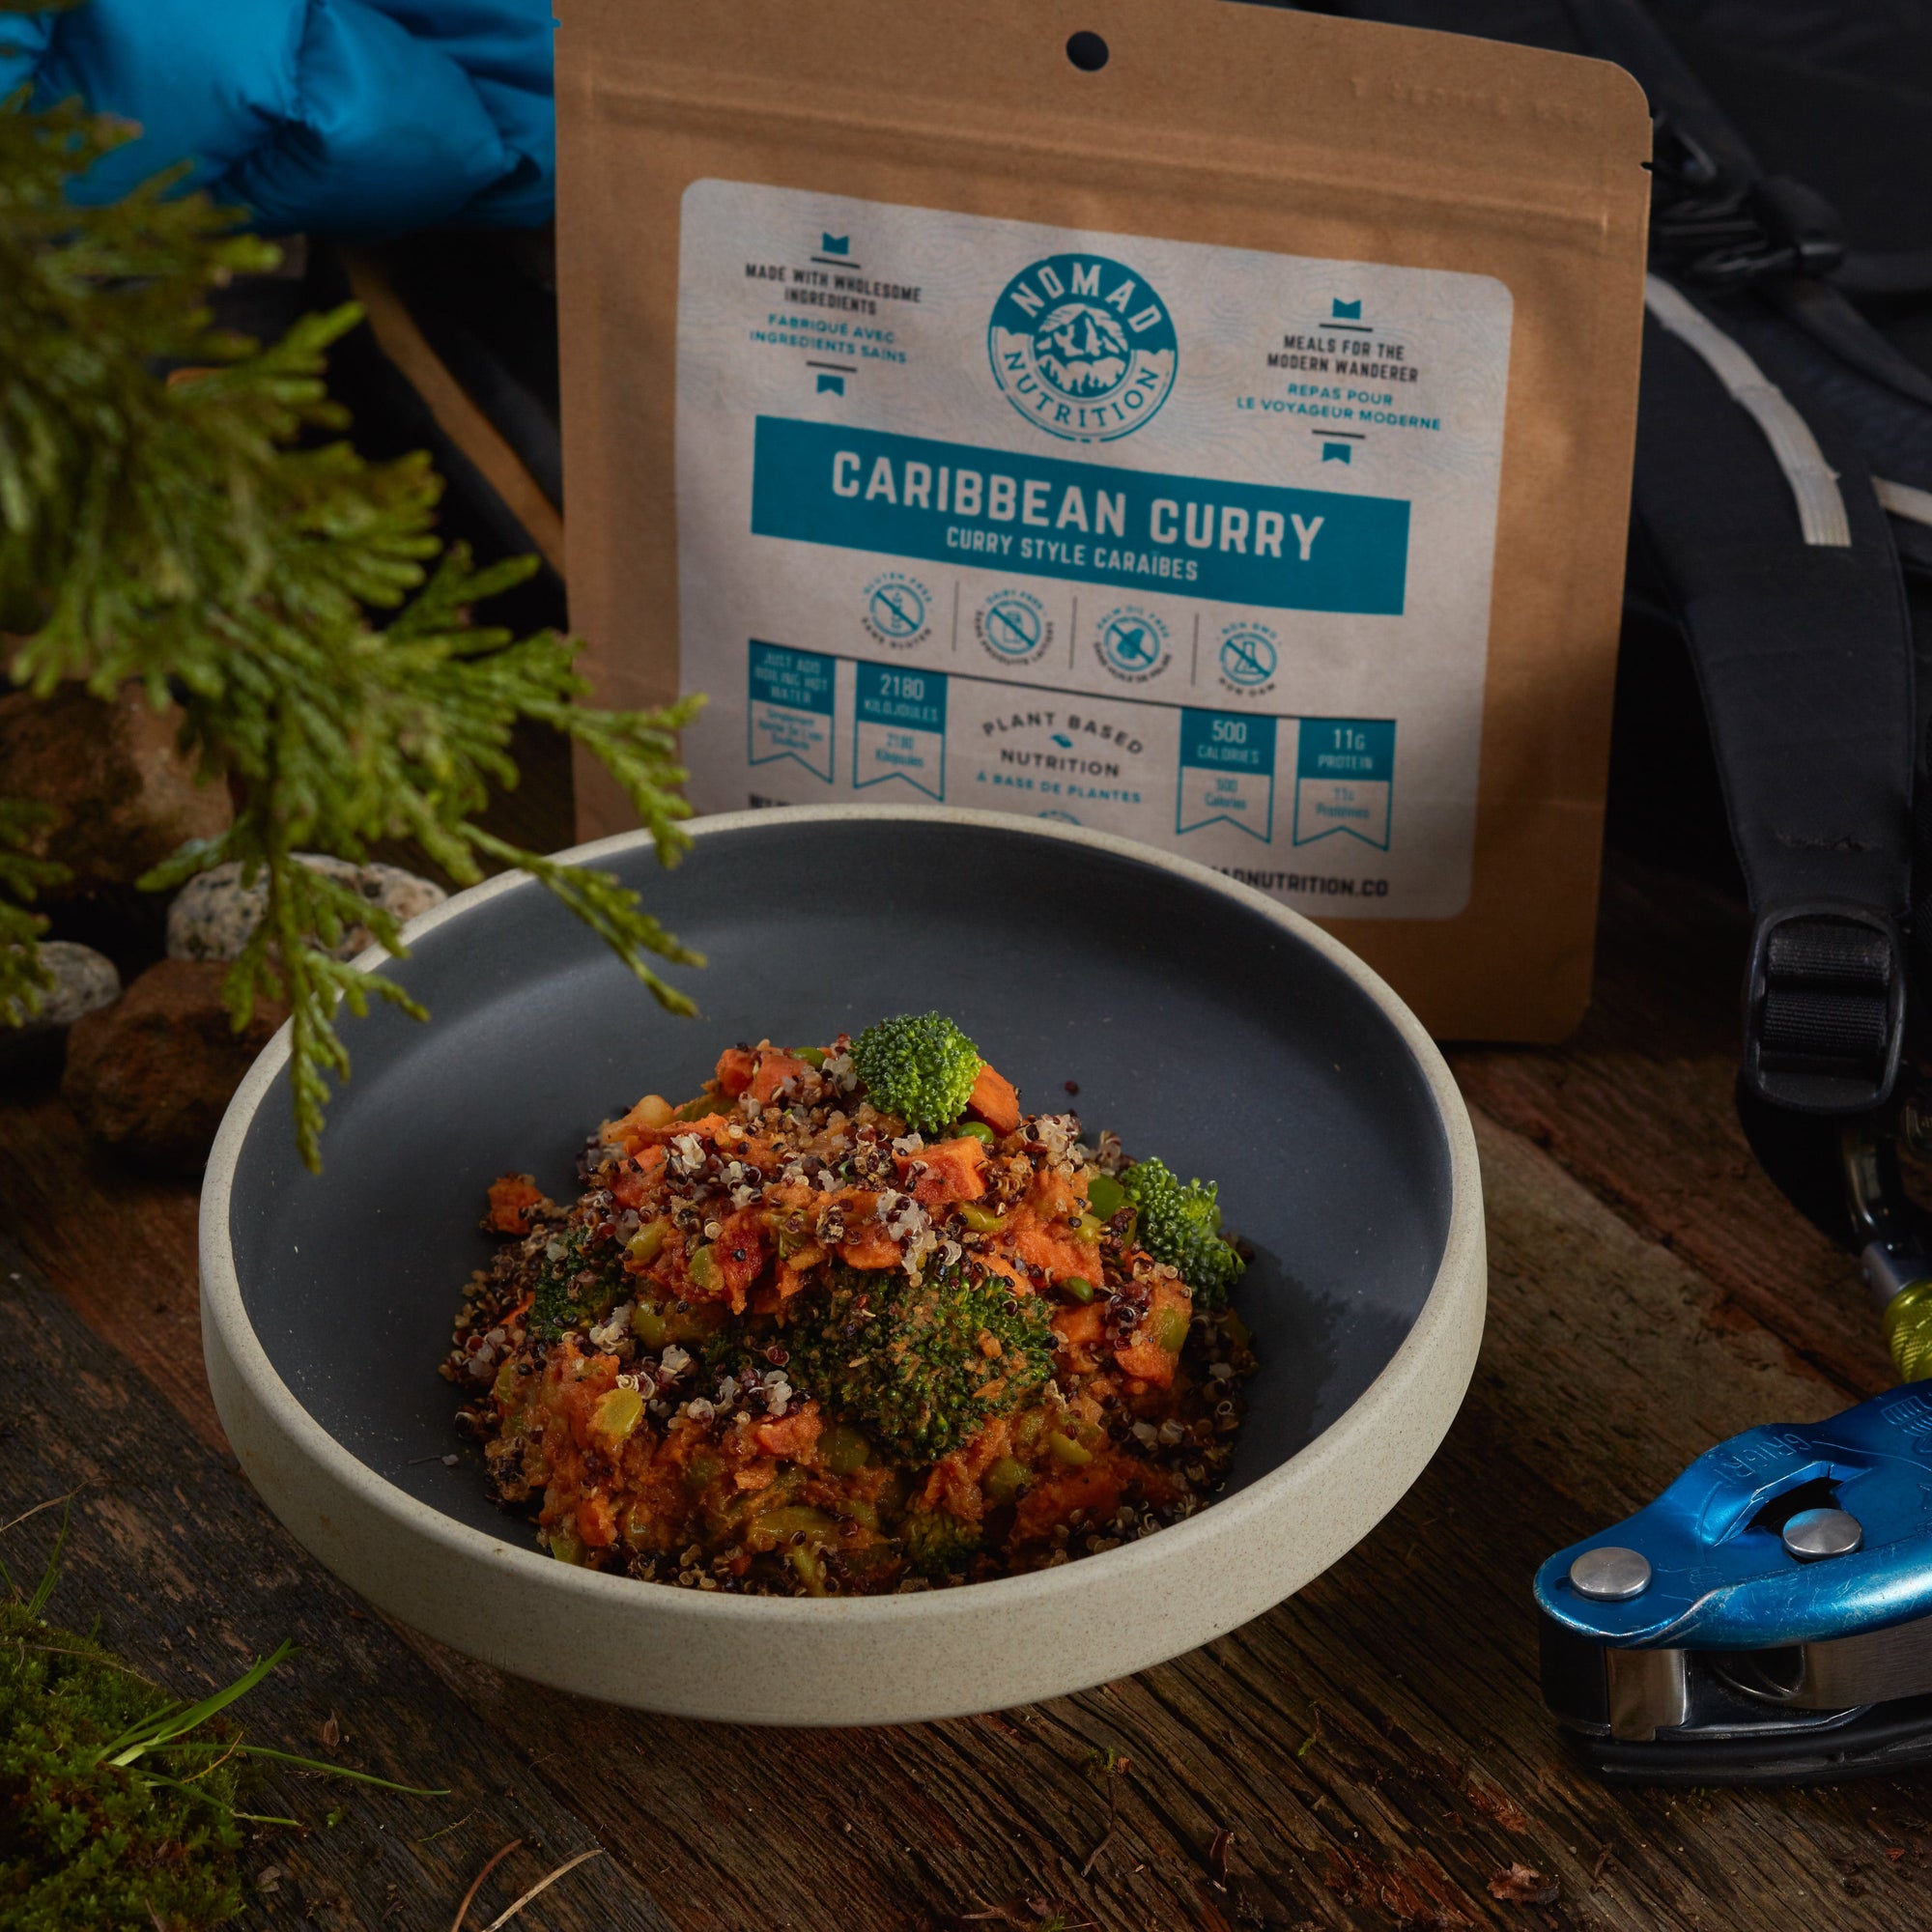 Rehydrated Nomad Nutrition Caribbean Curry in a bowl with 112g meal size on table top outdoors. No additional cooking required. 